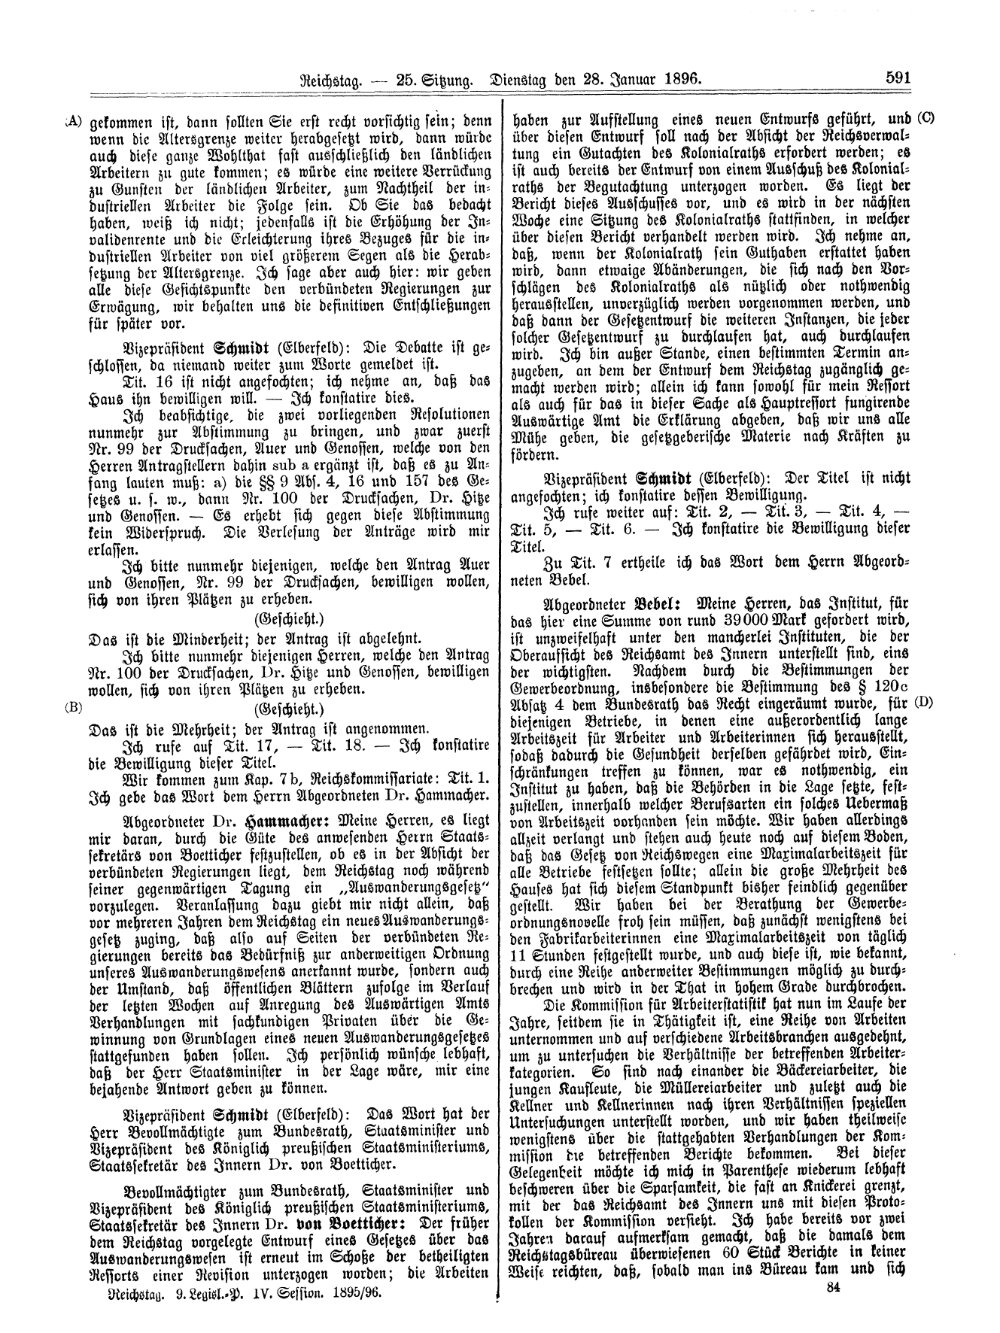 Scan of page 591